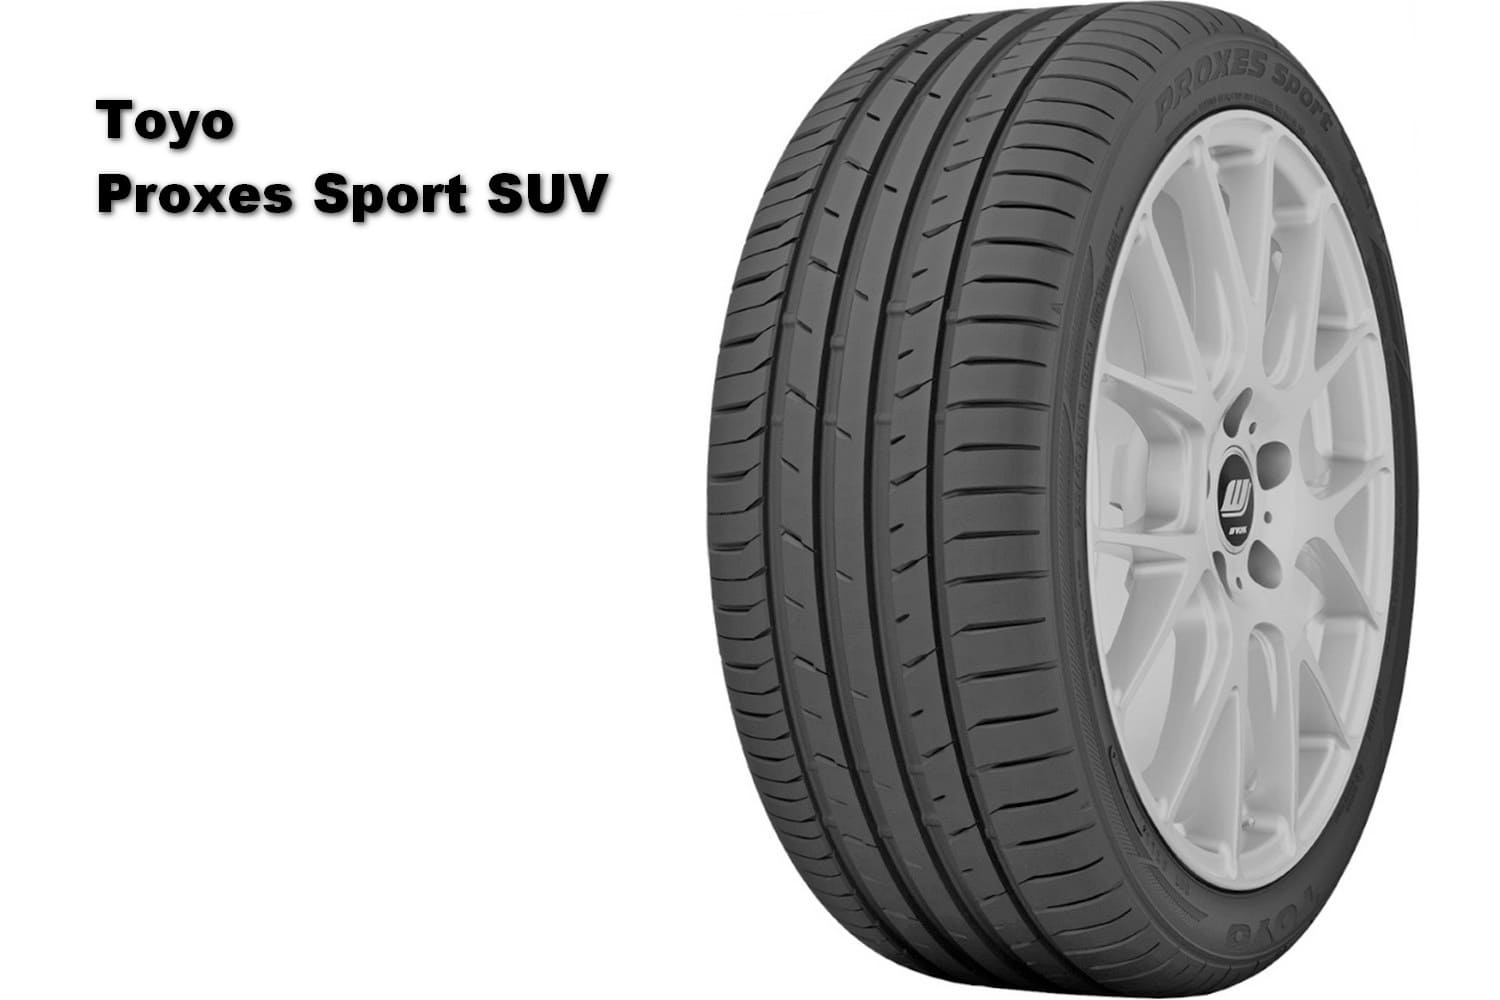 Toyo proxes sport r19. Toyo PROXES t1 Sport SUV 255/50 r19. Toyo PROXES t1 Sport. Toyo PROXES Sport SUV. Toyo PROXES Sport 255/40 r19.